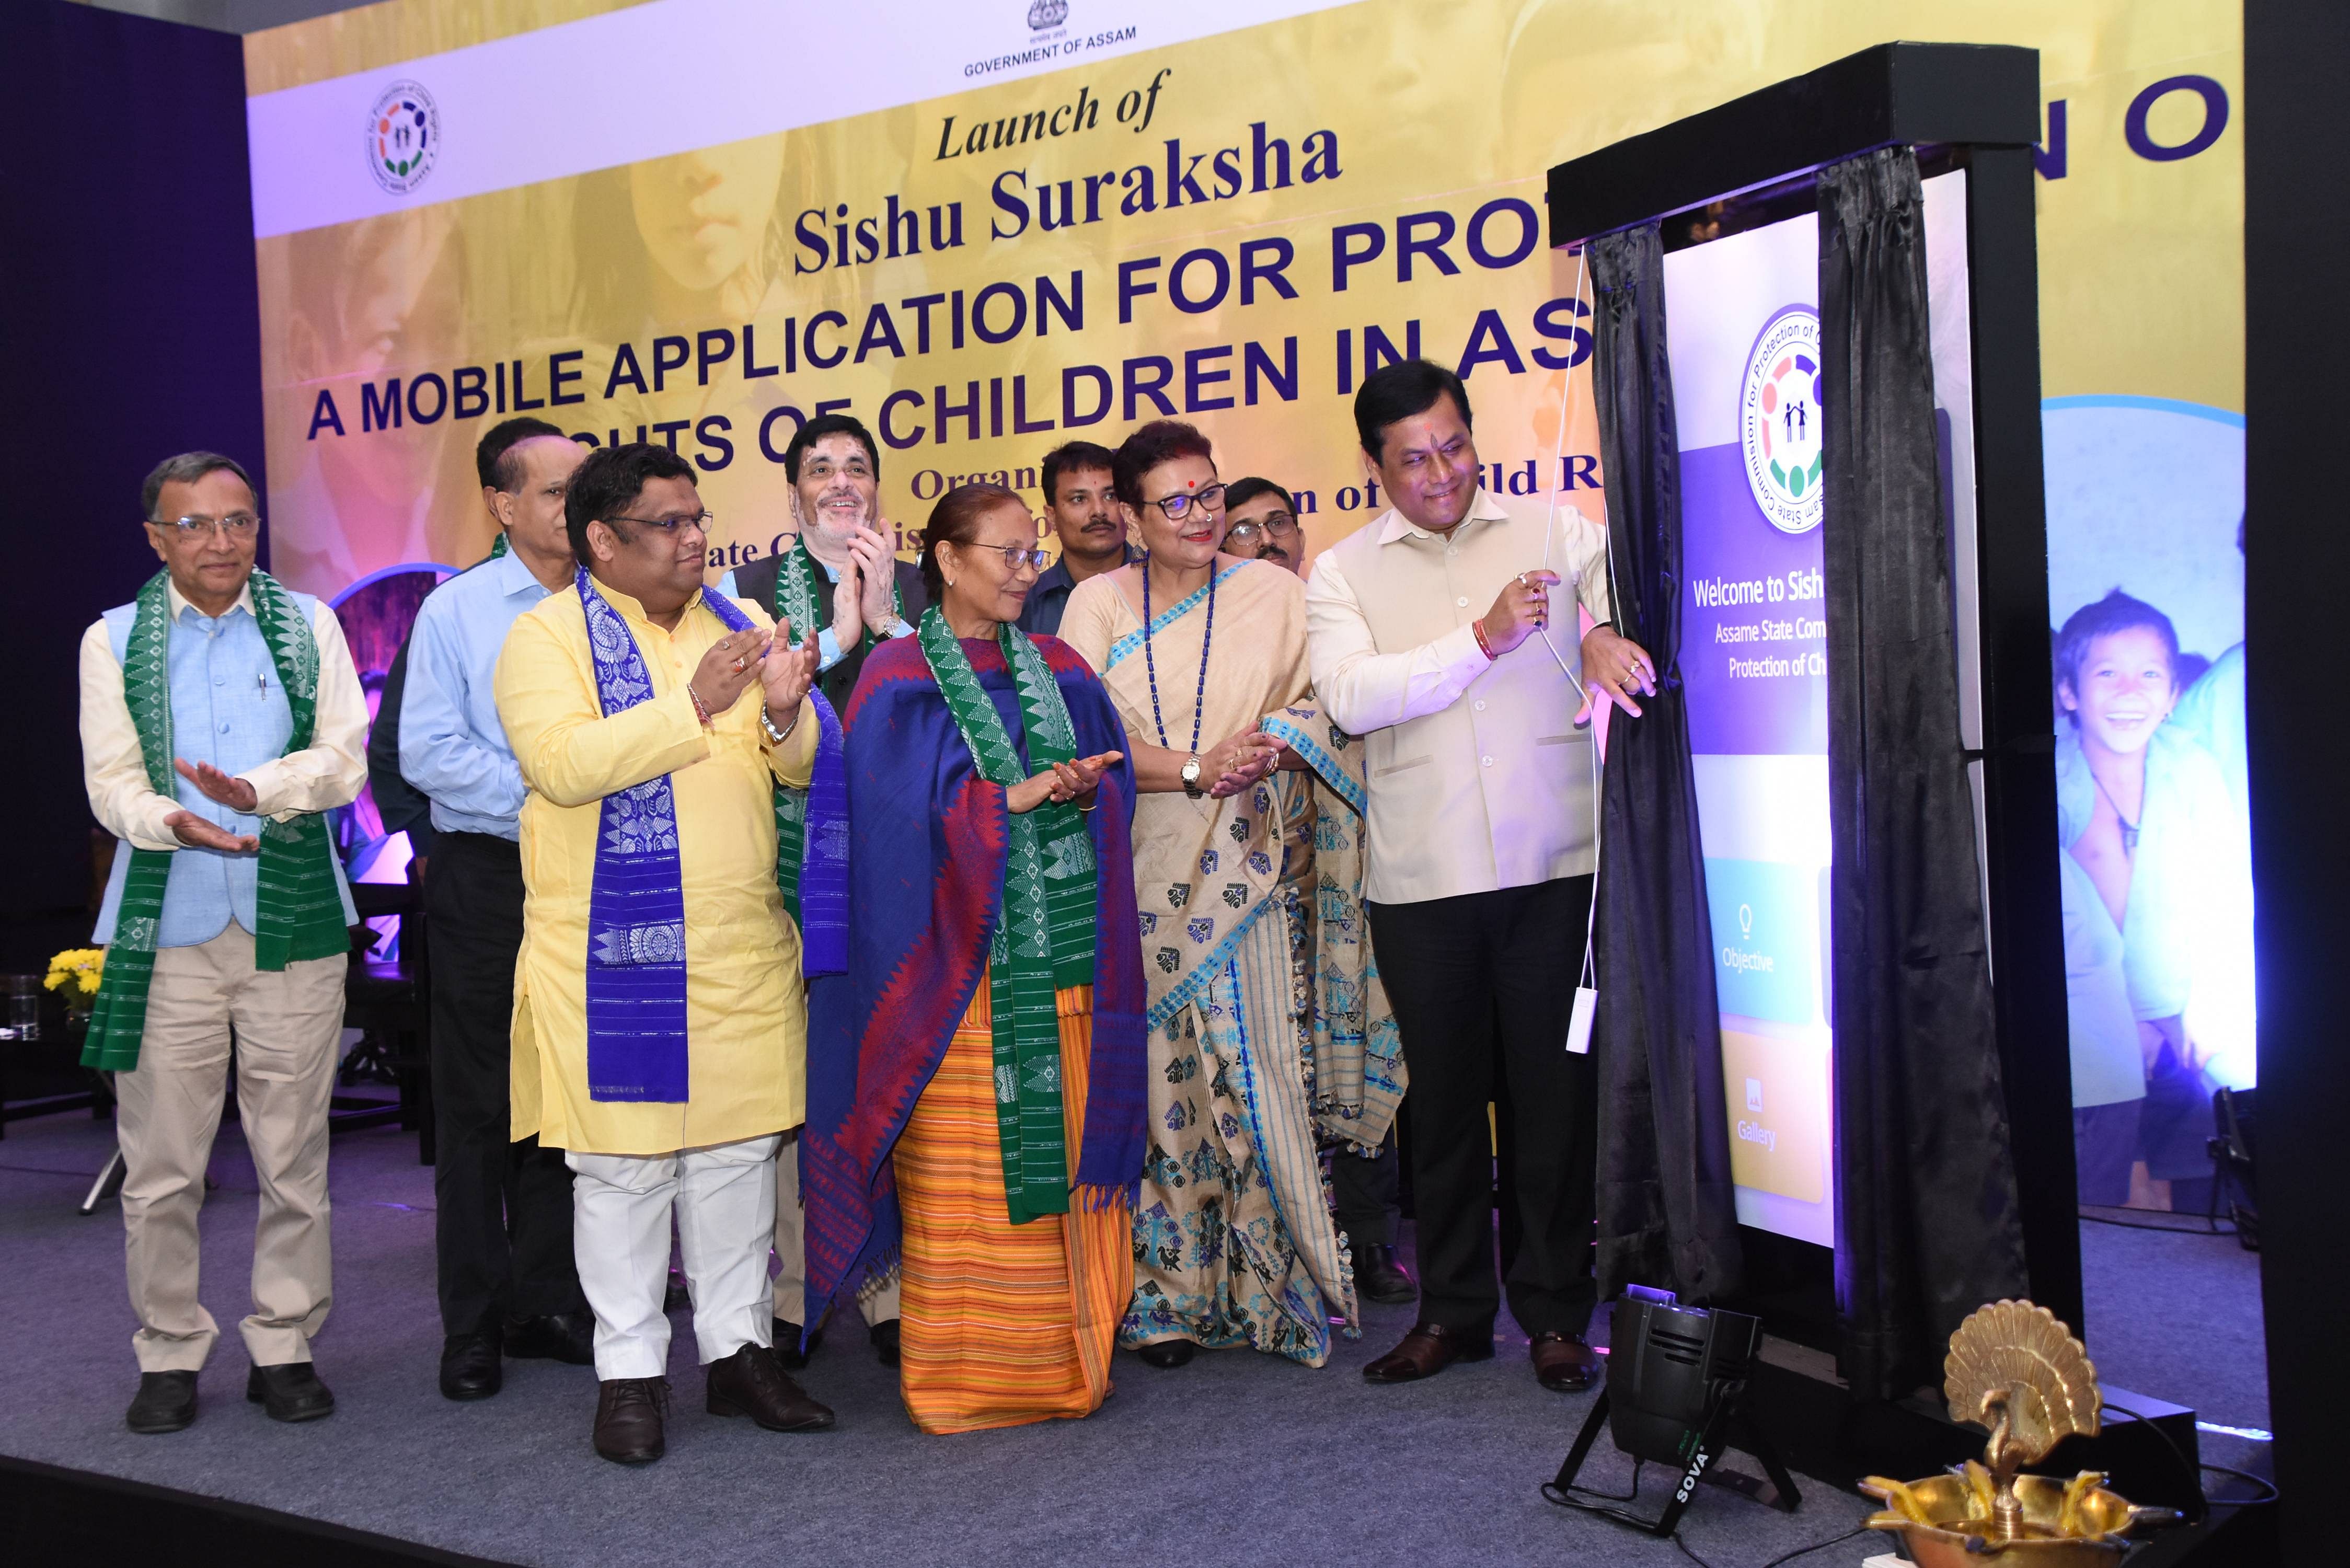 Assam chief minister Sarbananda Sonowal launching the child rights app in a Guwahati hotel on Thursday. (Photo credit: Assam govt) 